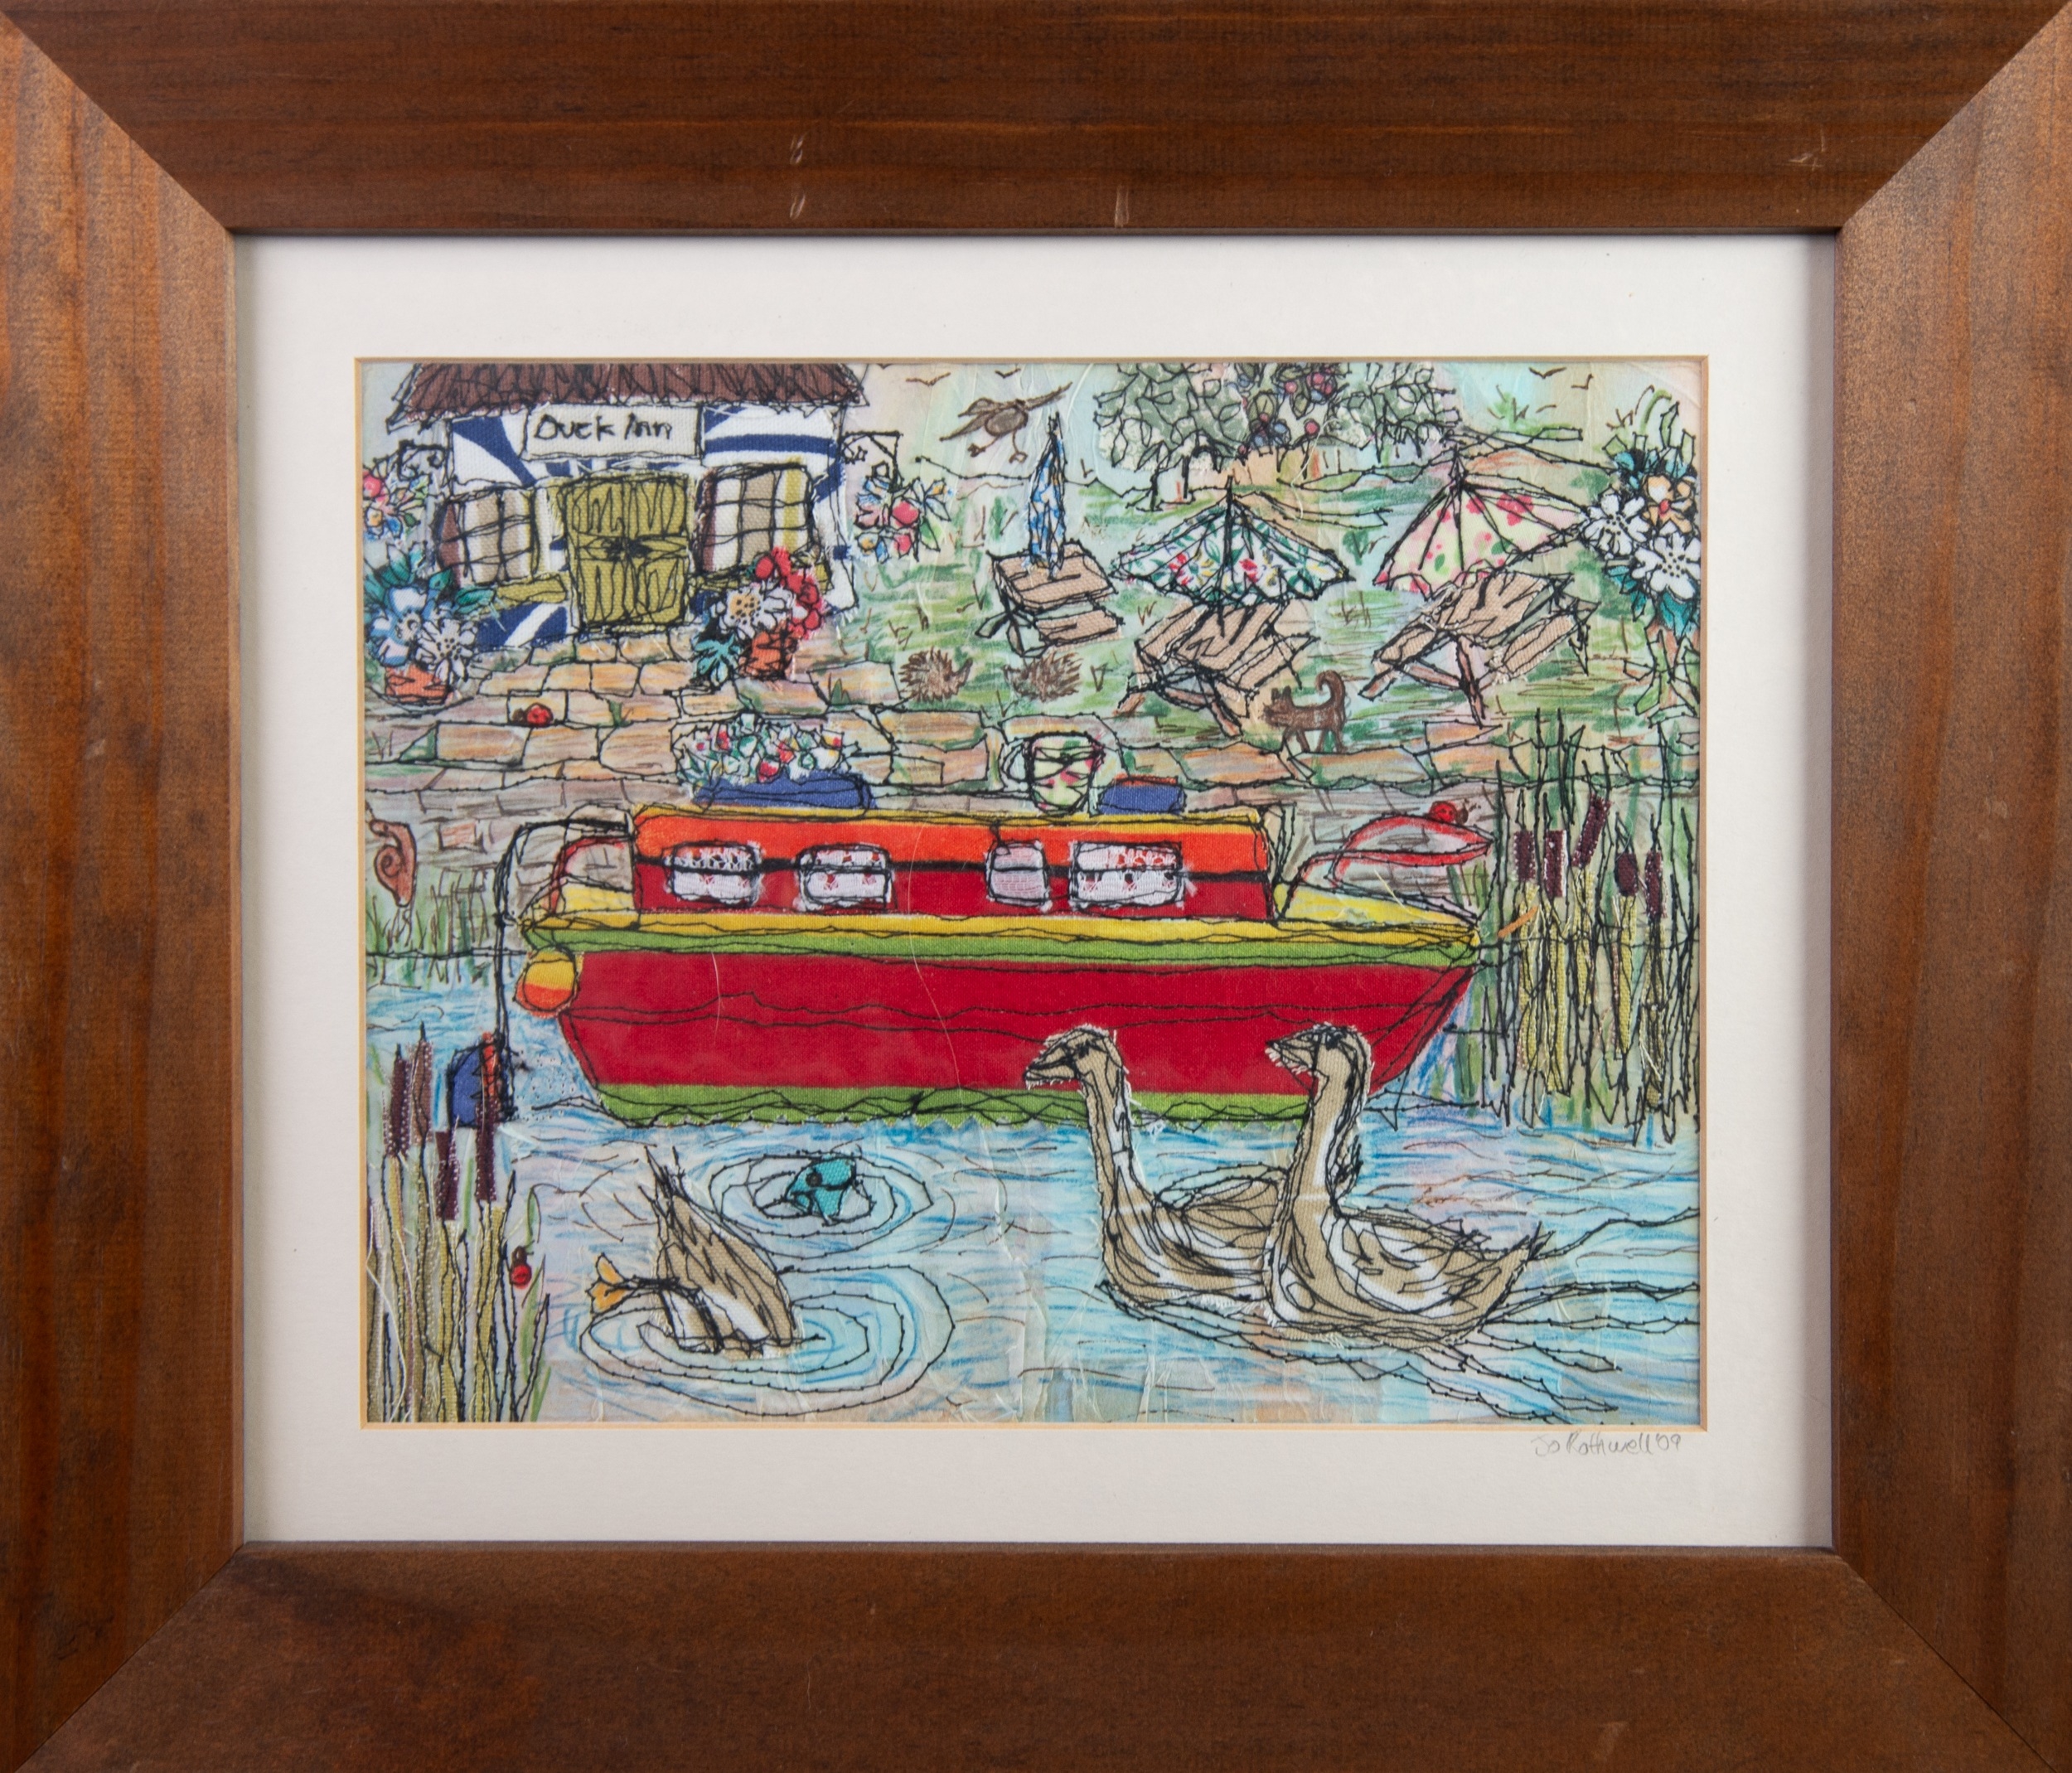 JO ROTHWELL (Contemporary) TEXTILE STITCH and WATERCOLOUR 'Duck Inn' Signed & dated (20)09 on the - Image 2 of 2